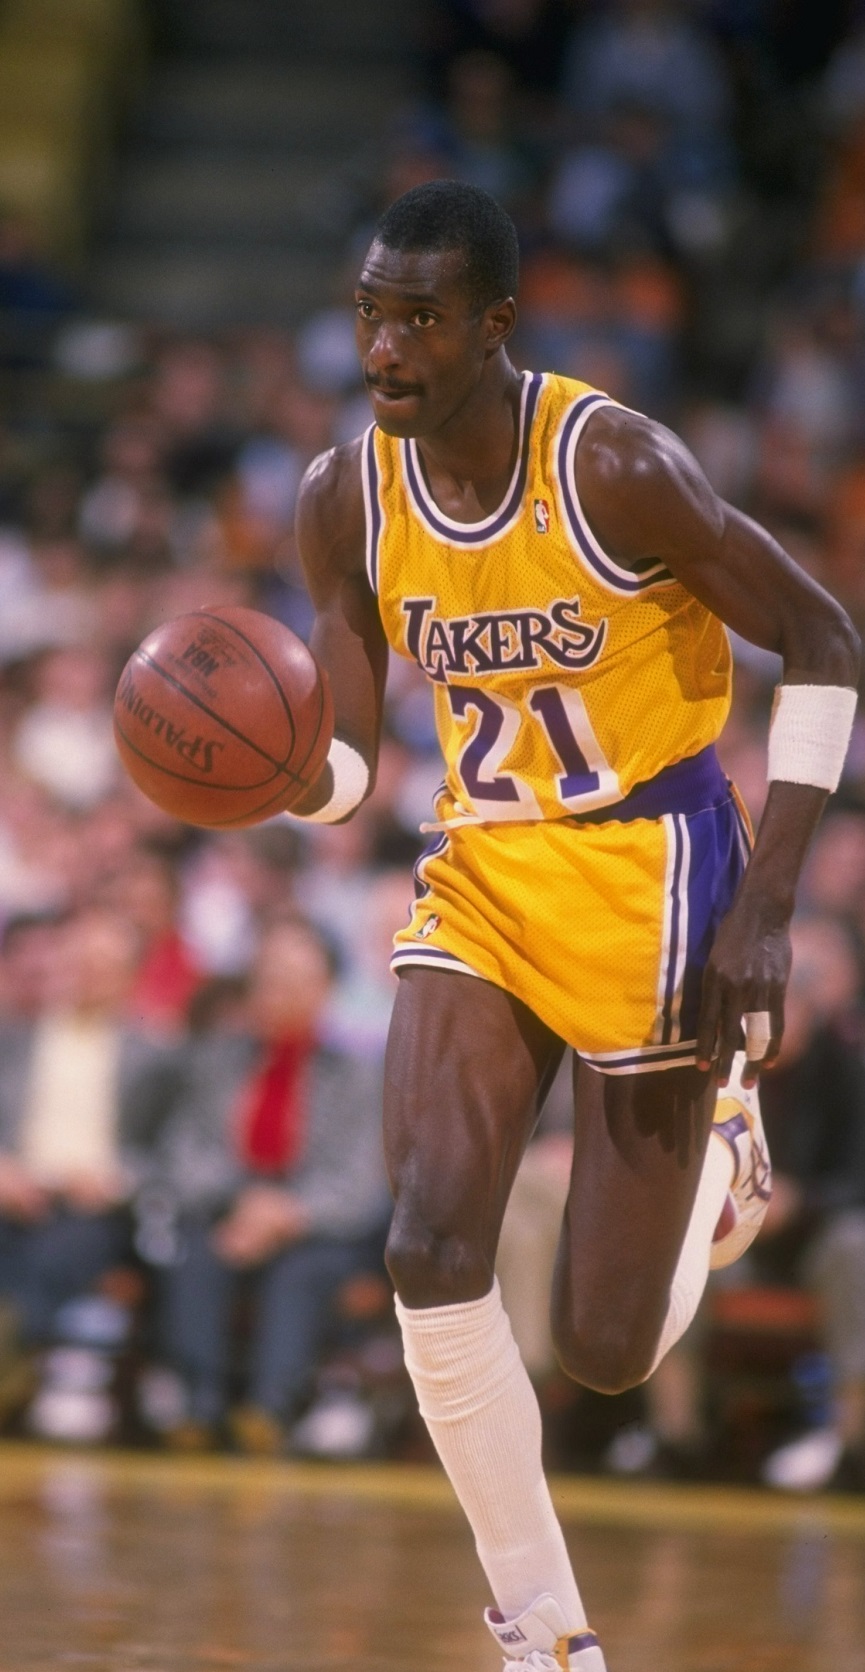 Happy Birthday to a Lakers Legend, 5x NBA Champion and the 1987